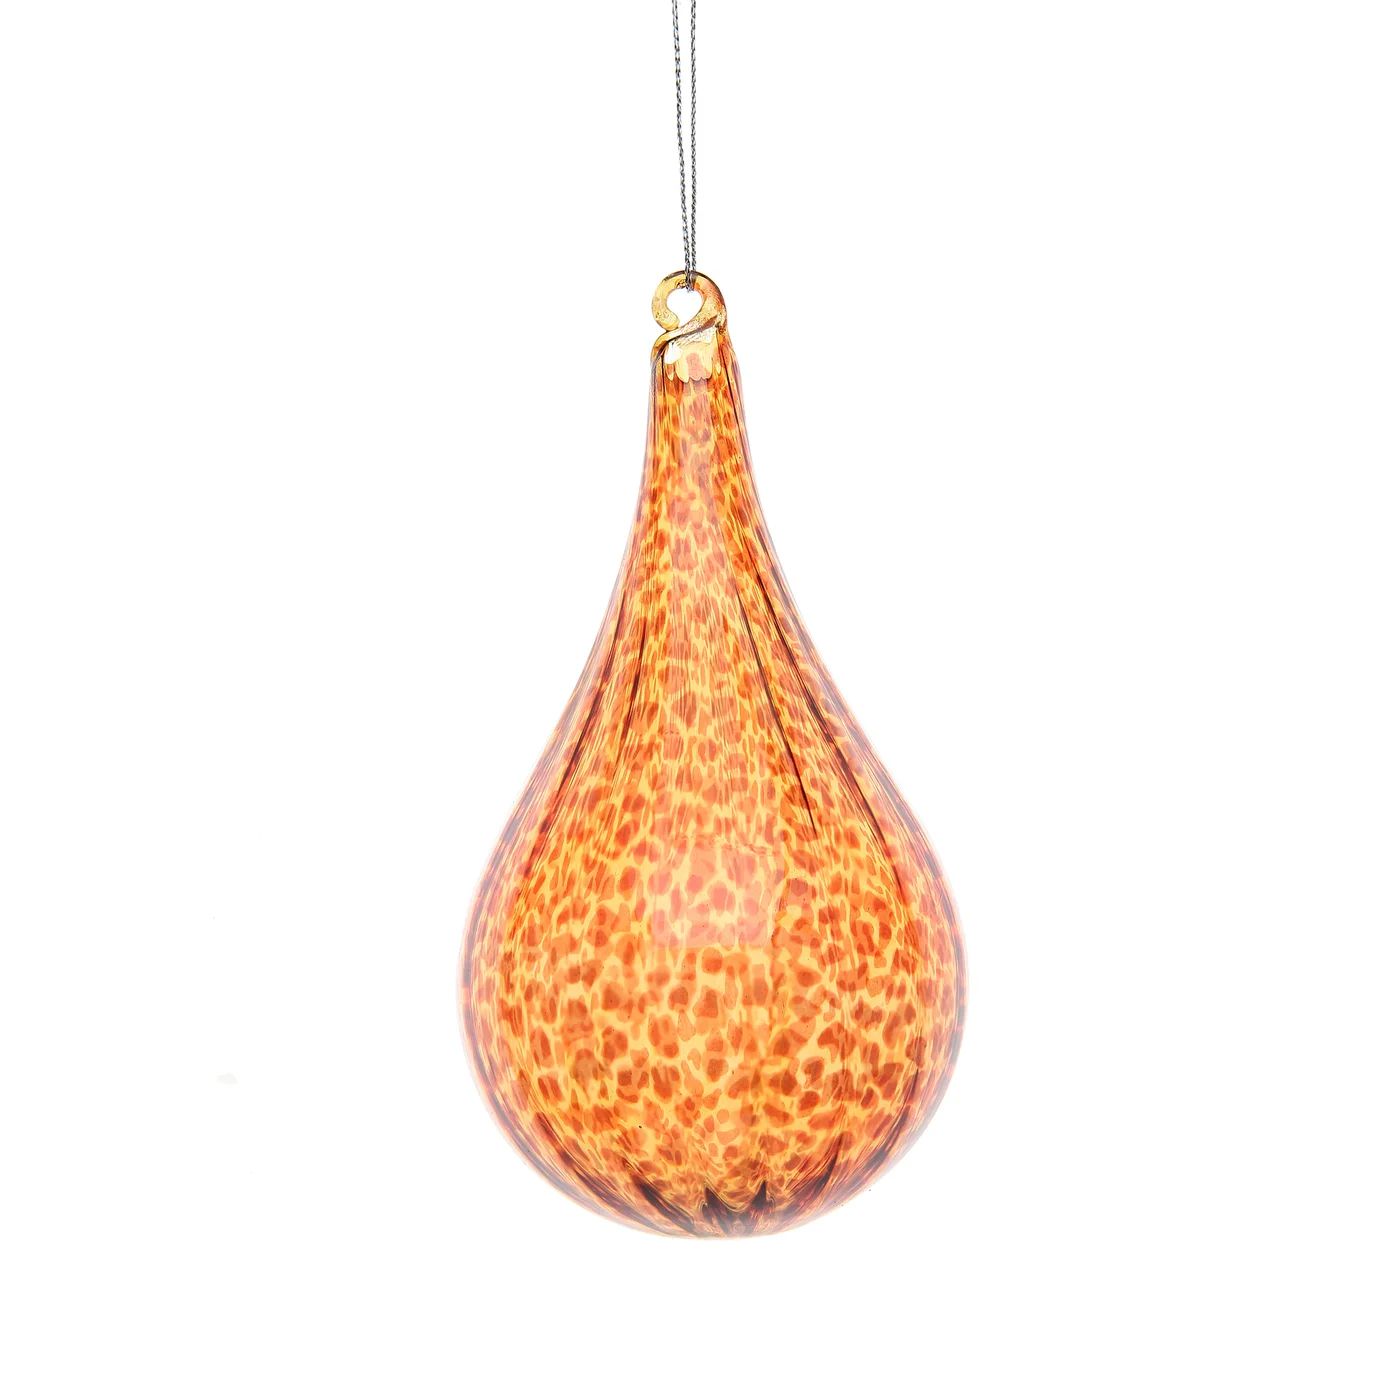 80 MM Spiral Leopard Drop Ornament-Home/Giftware-Kevin's Fine Outdoor Gear & Apparel